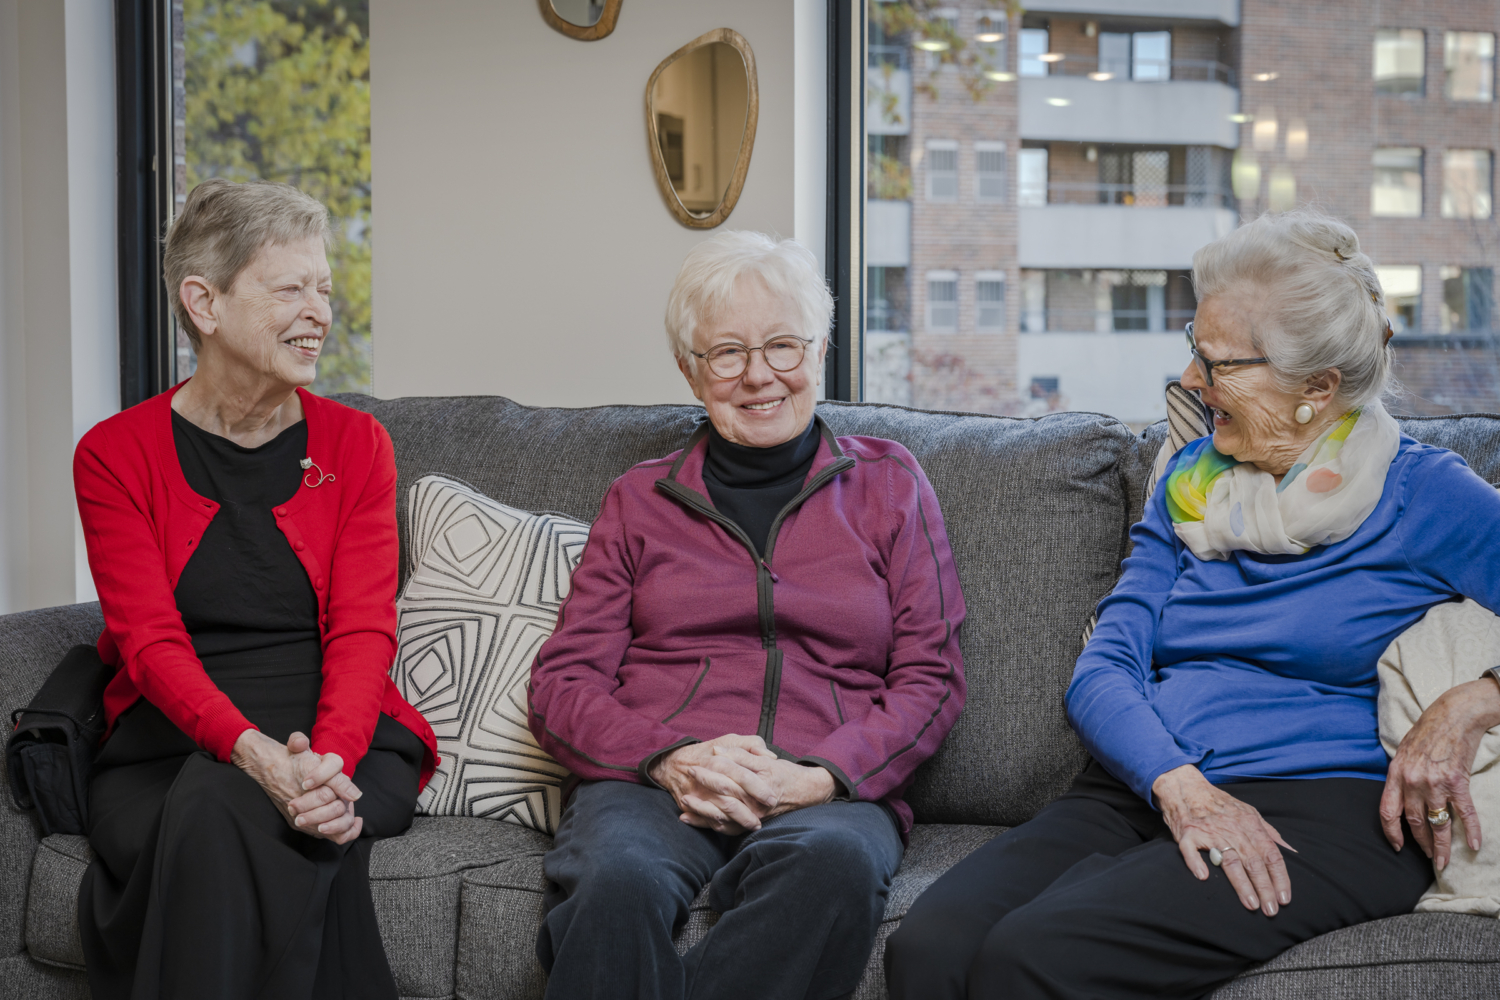 three senior women sitting together on a couch and smiling